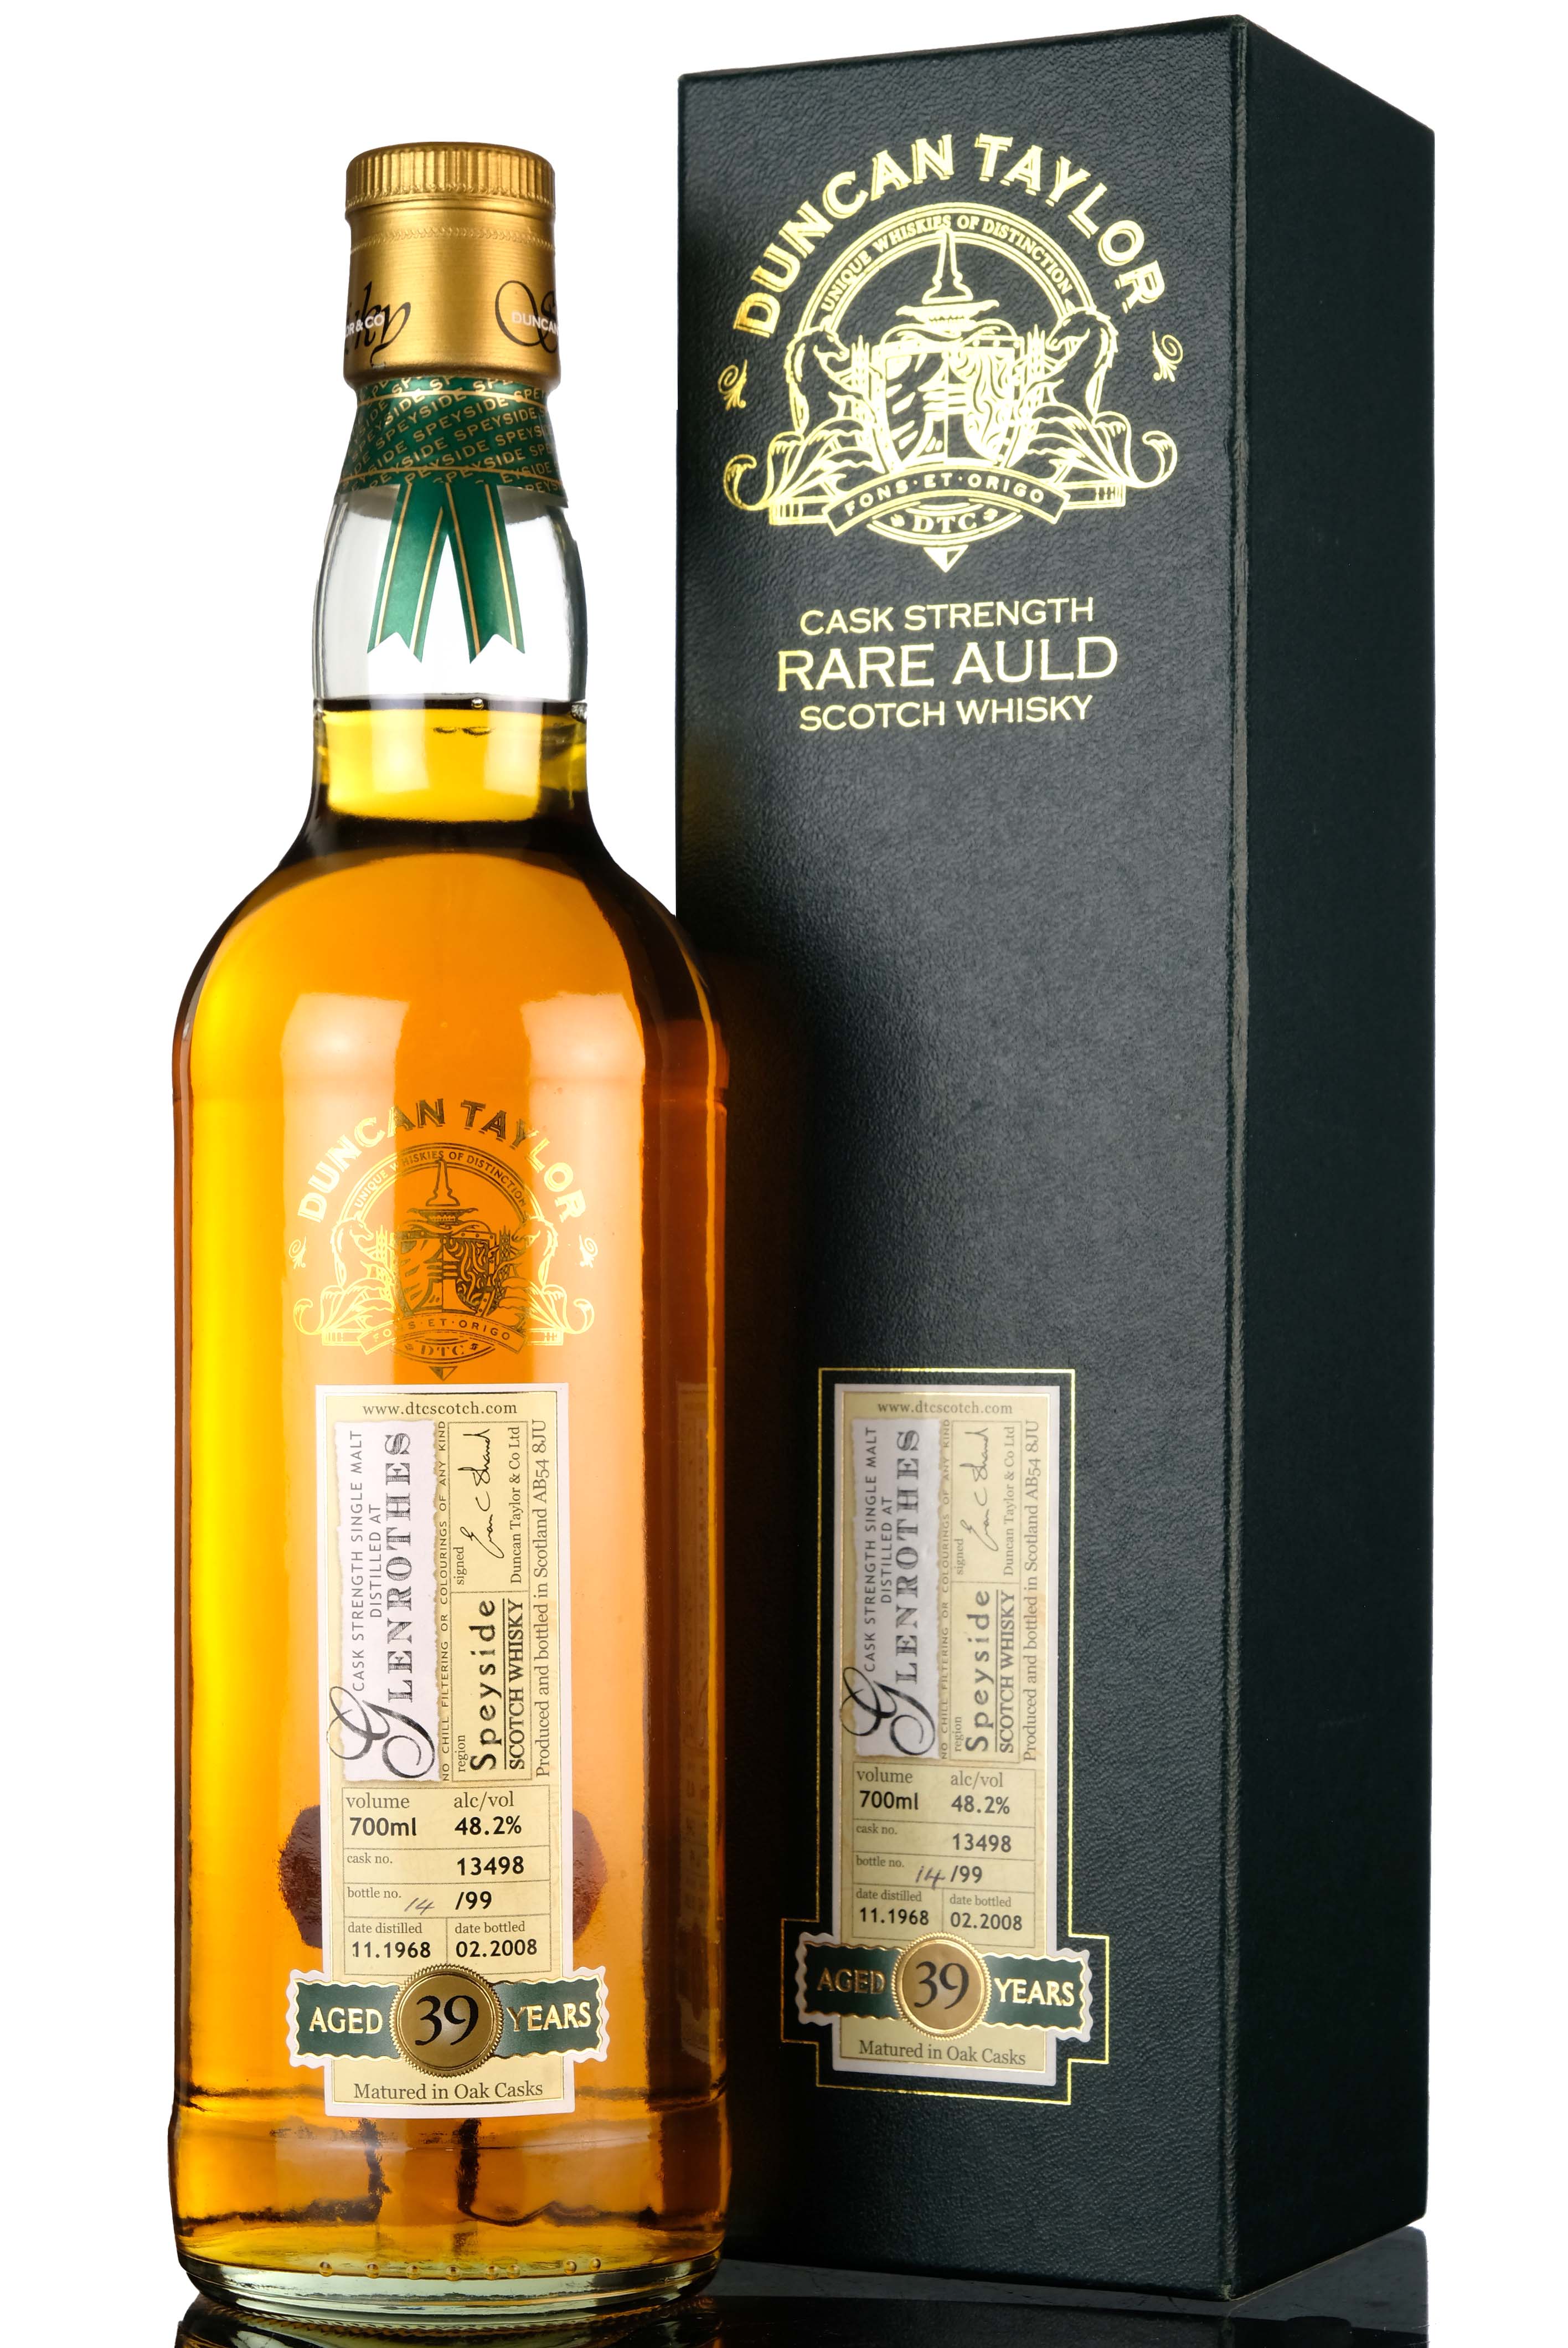 Glenrothes 1968-2008 - 39 Year Old - Duncan Taylor - Rare Auld